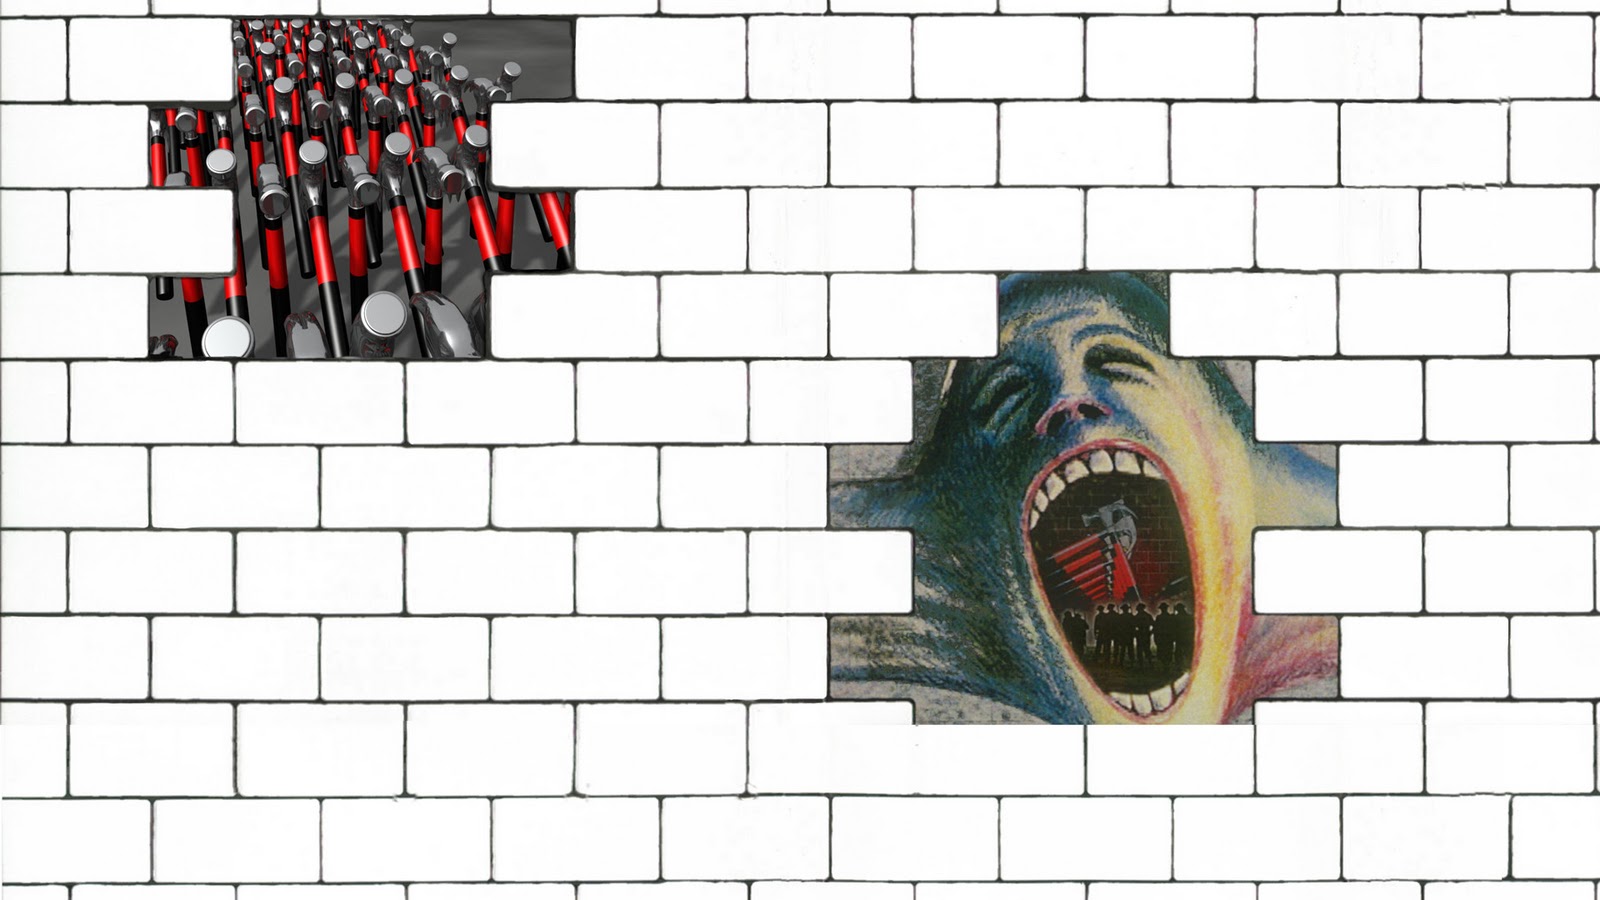 pink floyd the wall album itunes download